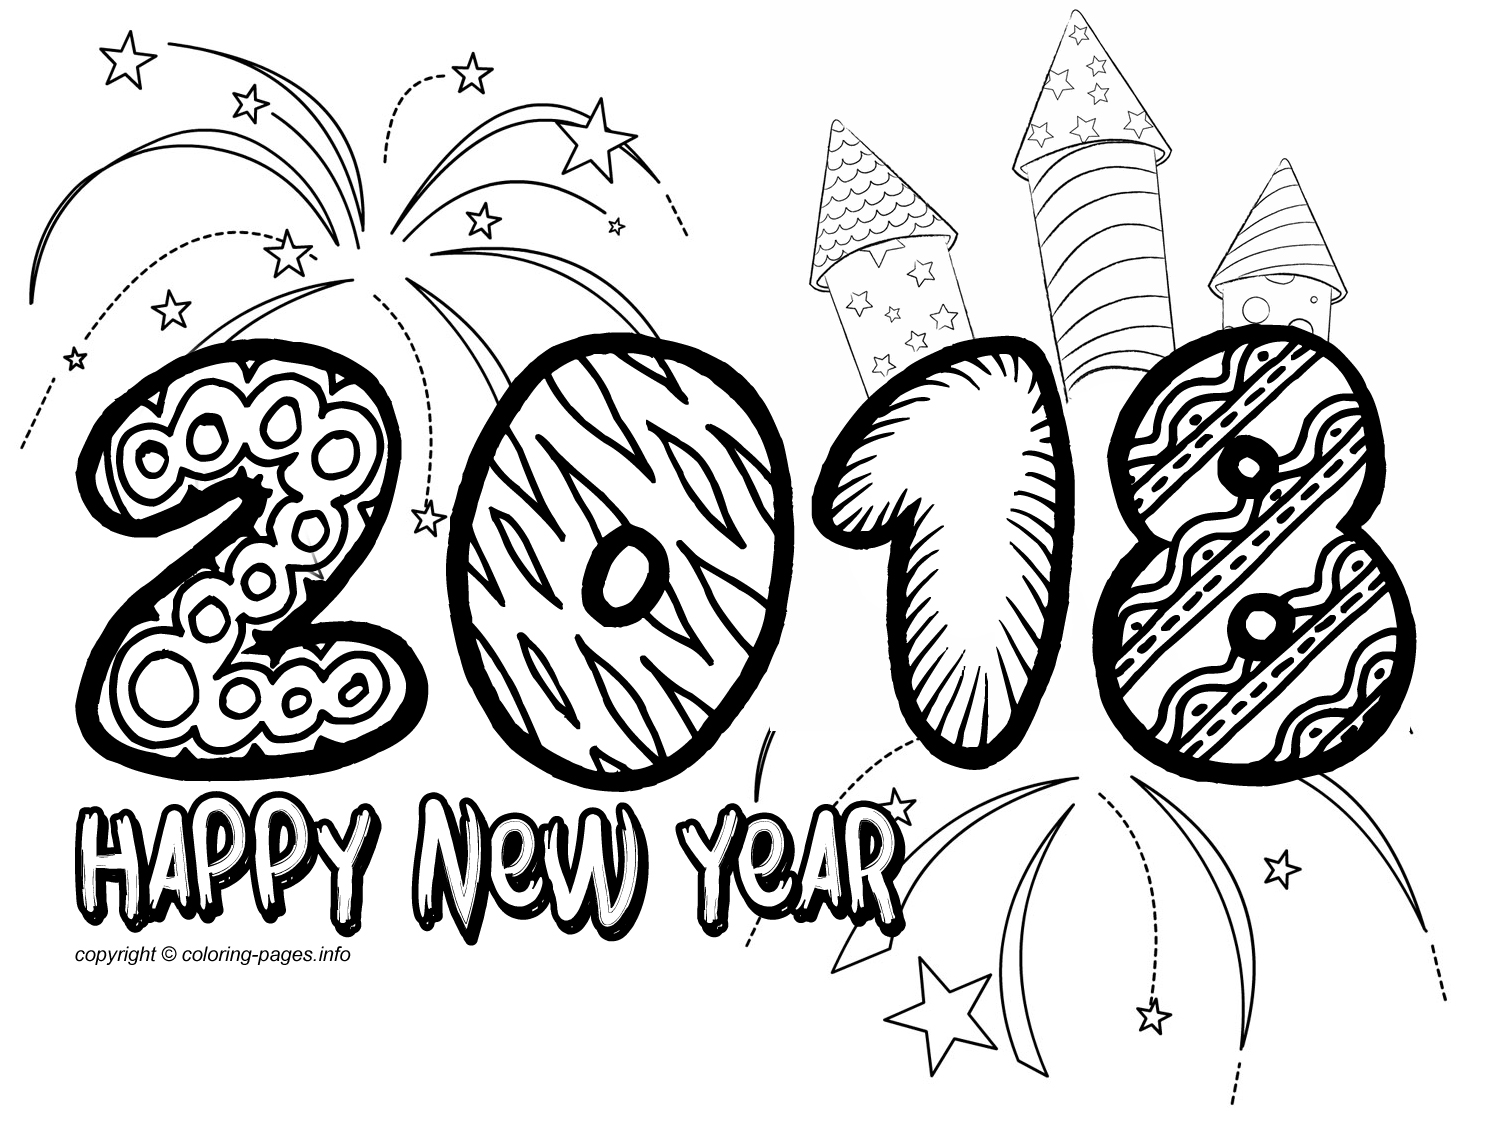 Happy New Year 2018 Doodle Coloring Page